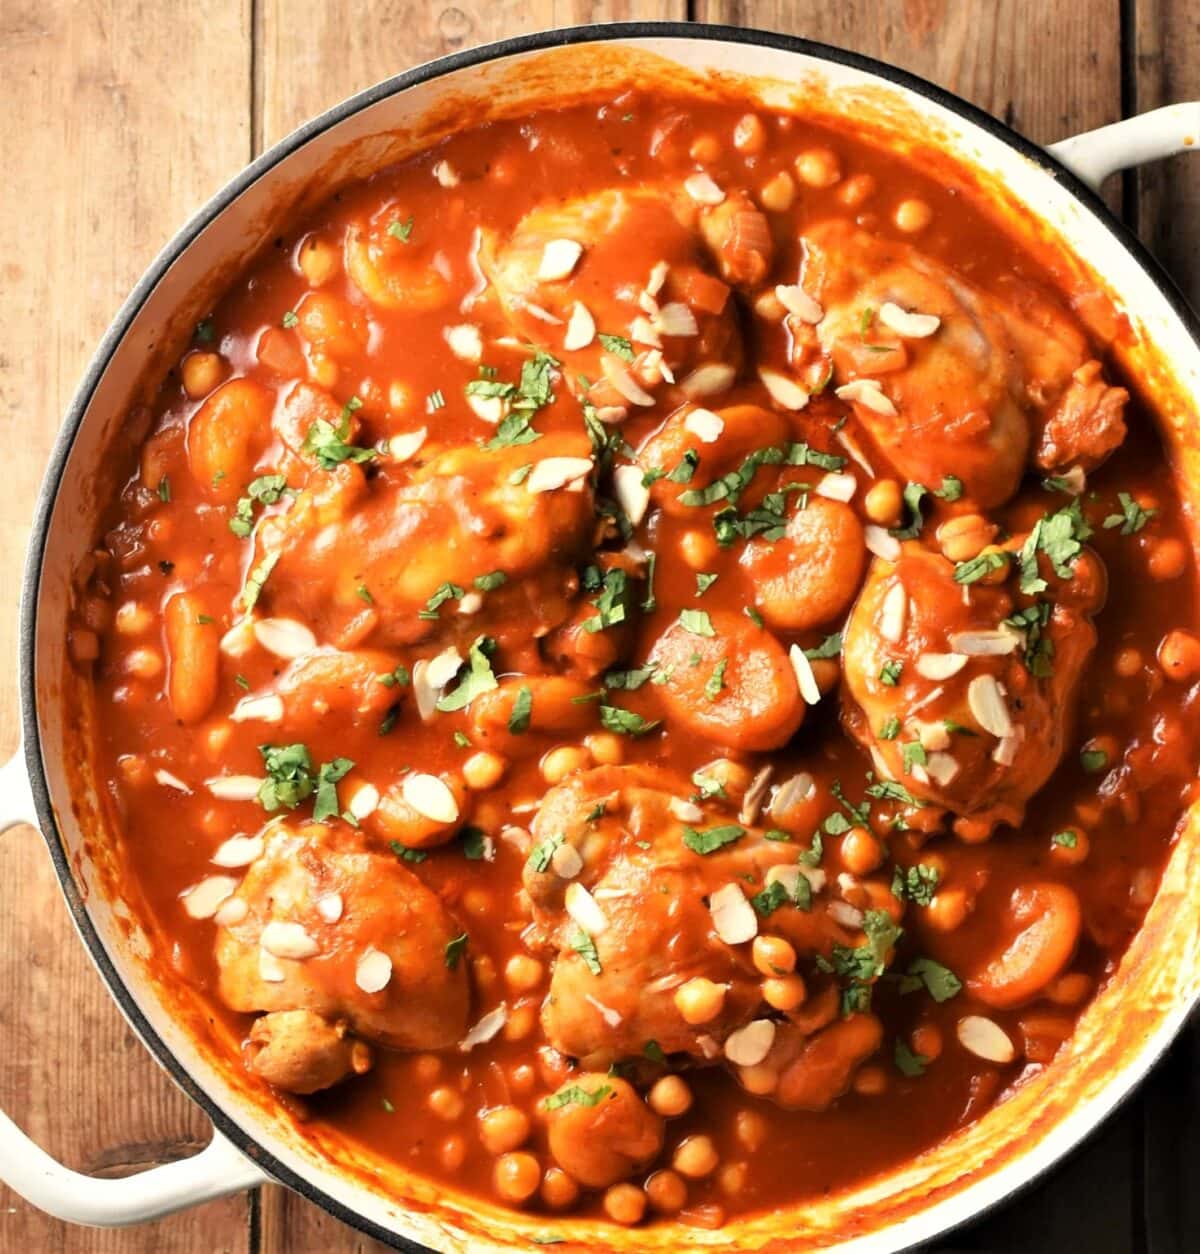 Chicken with chickpeas in tomato sauce with almond flakes in shallow white dish.